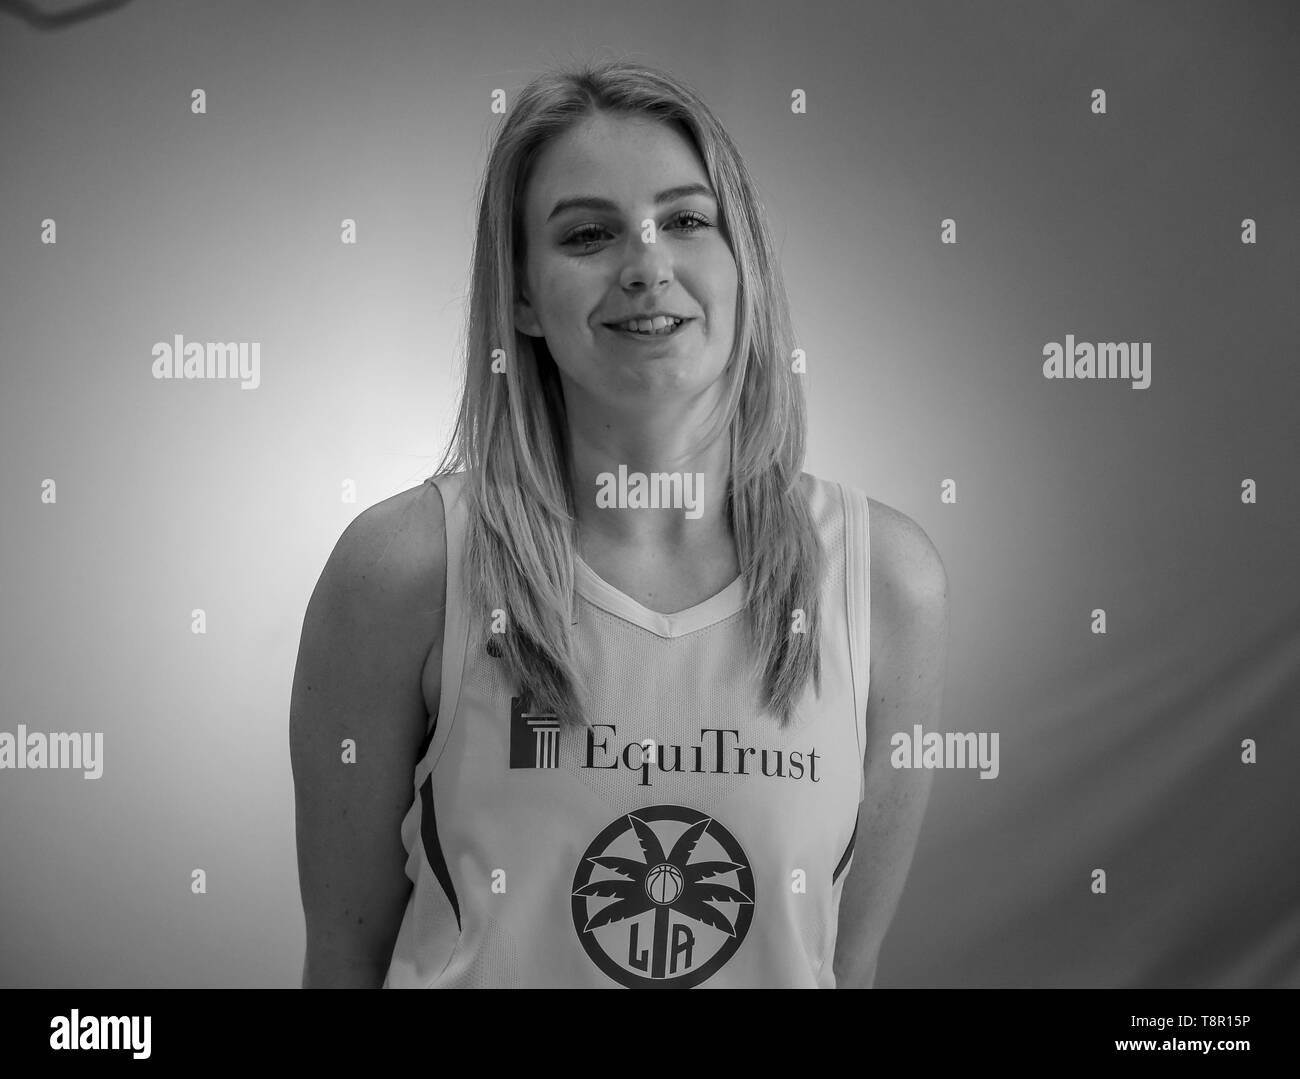 WNBA 2019: Los Angeles Sparks guard Karlie Samuelson #44 during Los Angeles Sparks Media Day May 14, 2019 at Los Angeles Southwest College. (Photo by Jevone Moore) Stock Photo